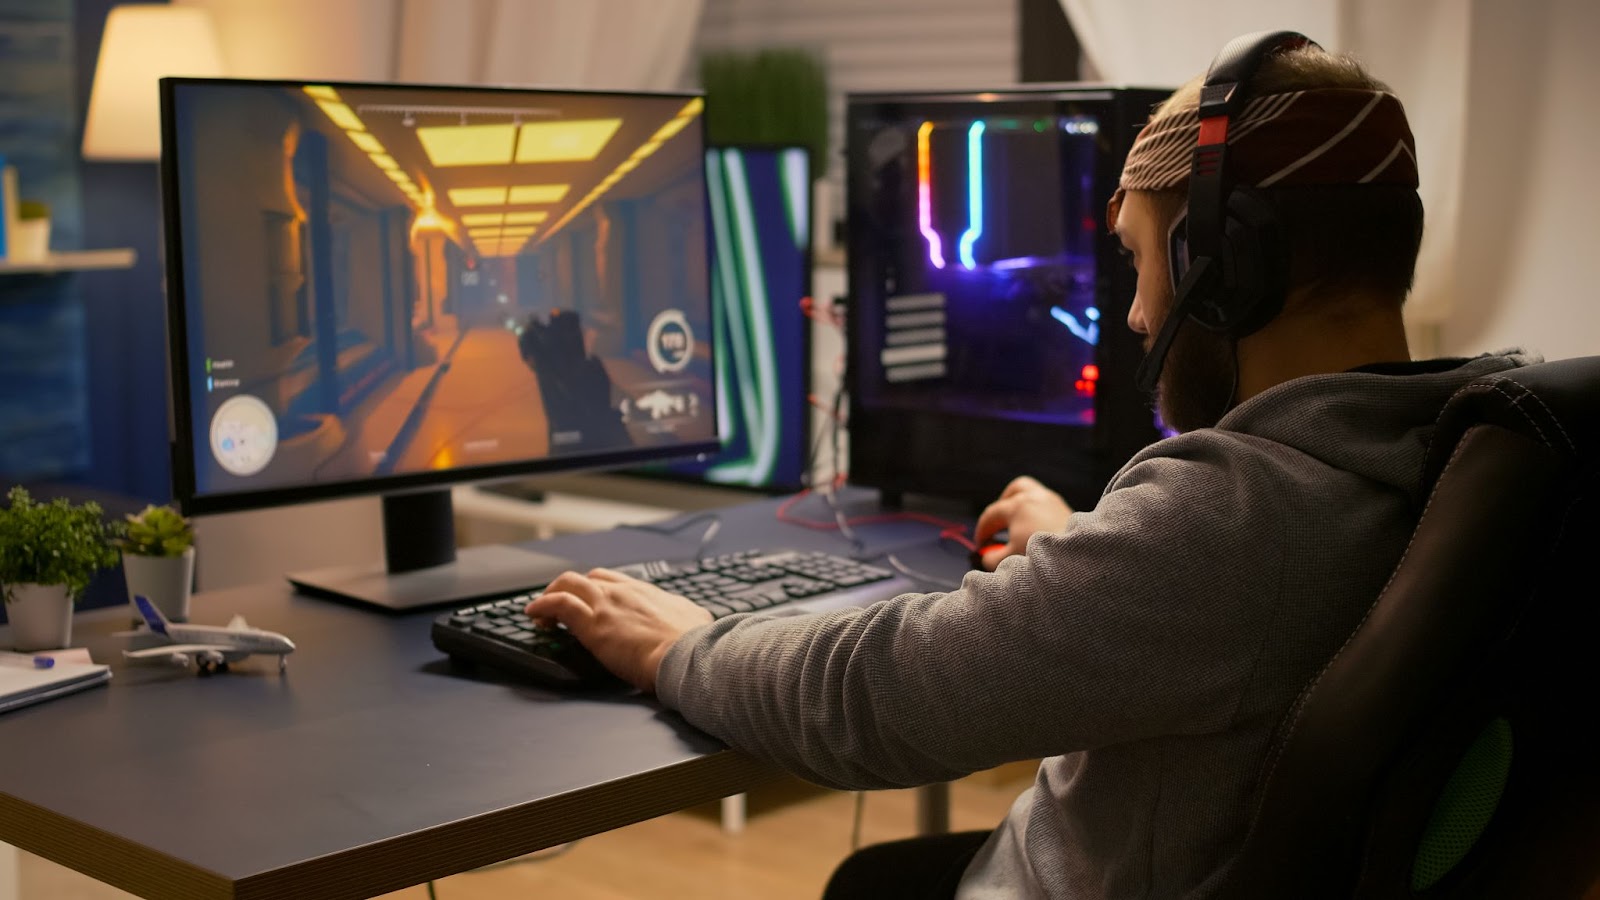 PC Gaming. Player sitting at a desk playing an FPS game